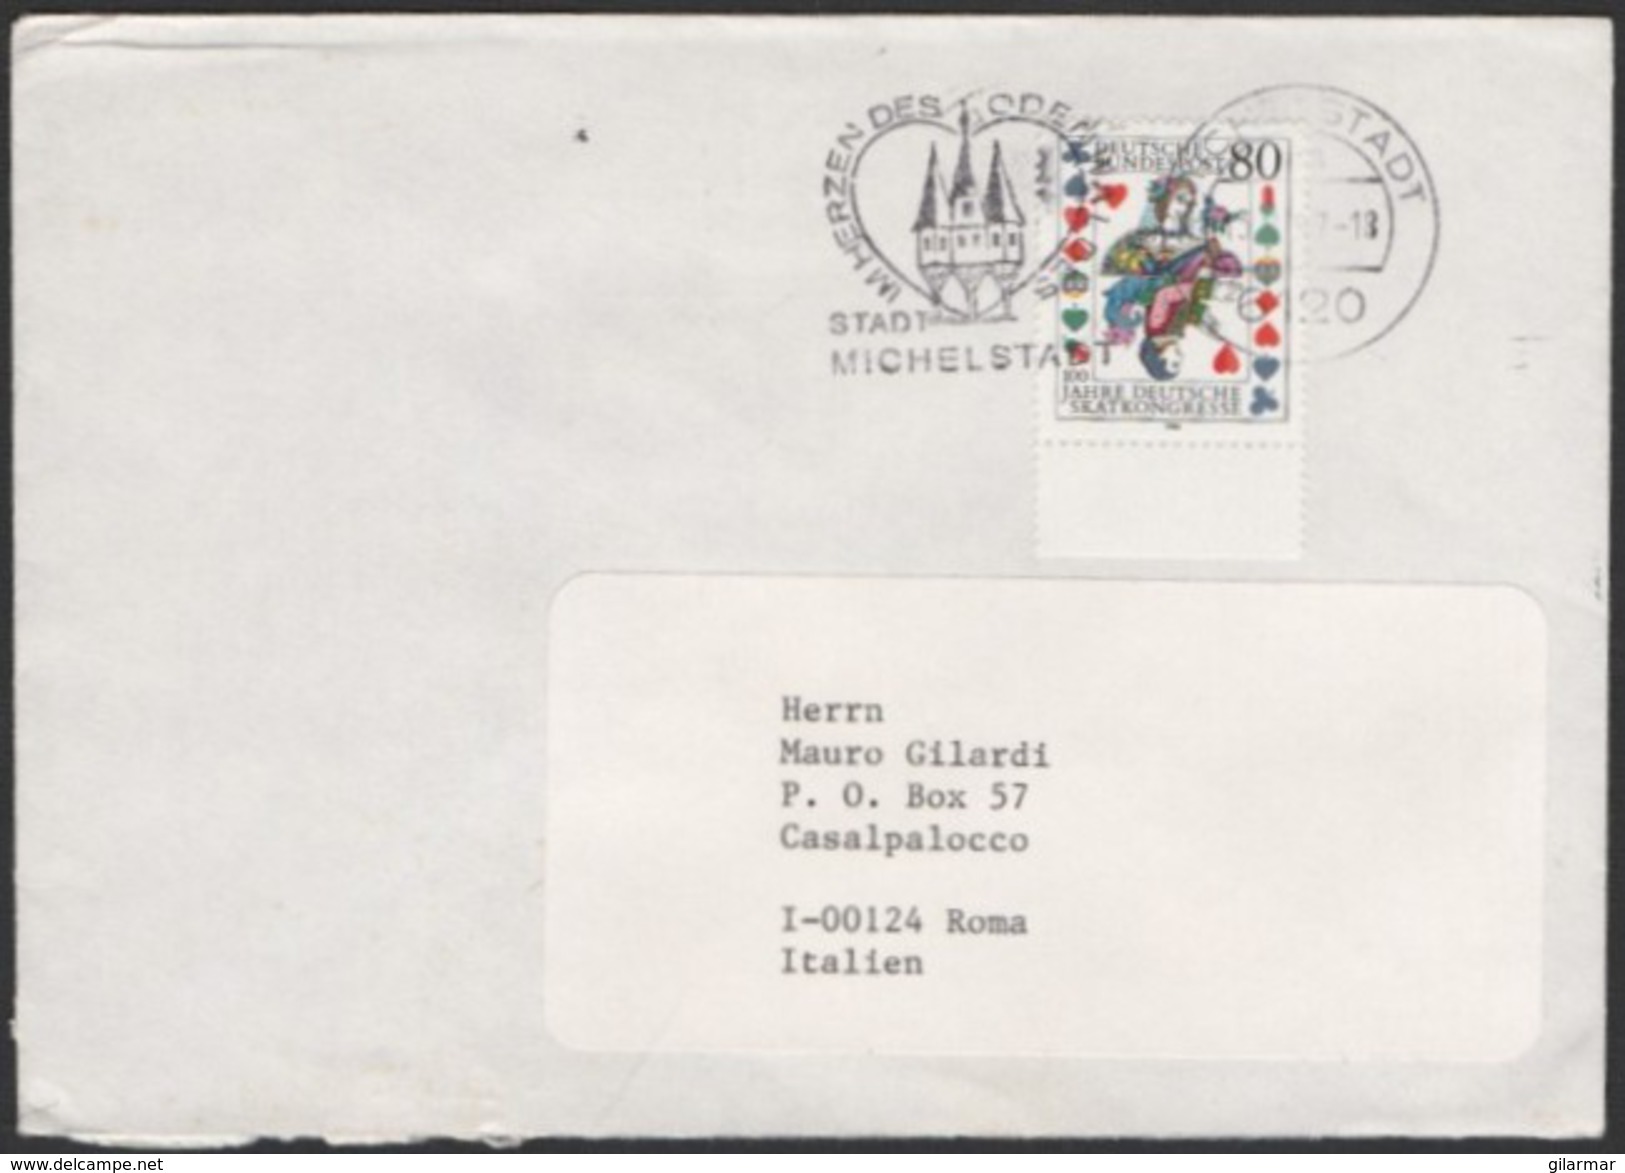 TOWERS - GERMANY MICHELSTADT 1987 - MAILED ENVELOPE - IN THE HEART OF THE ODENWALD - CITY OF MICHELSTADT - Inverno1972: Sapporo